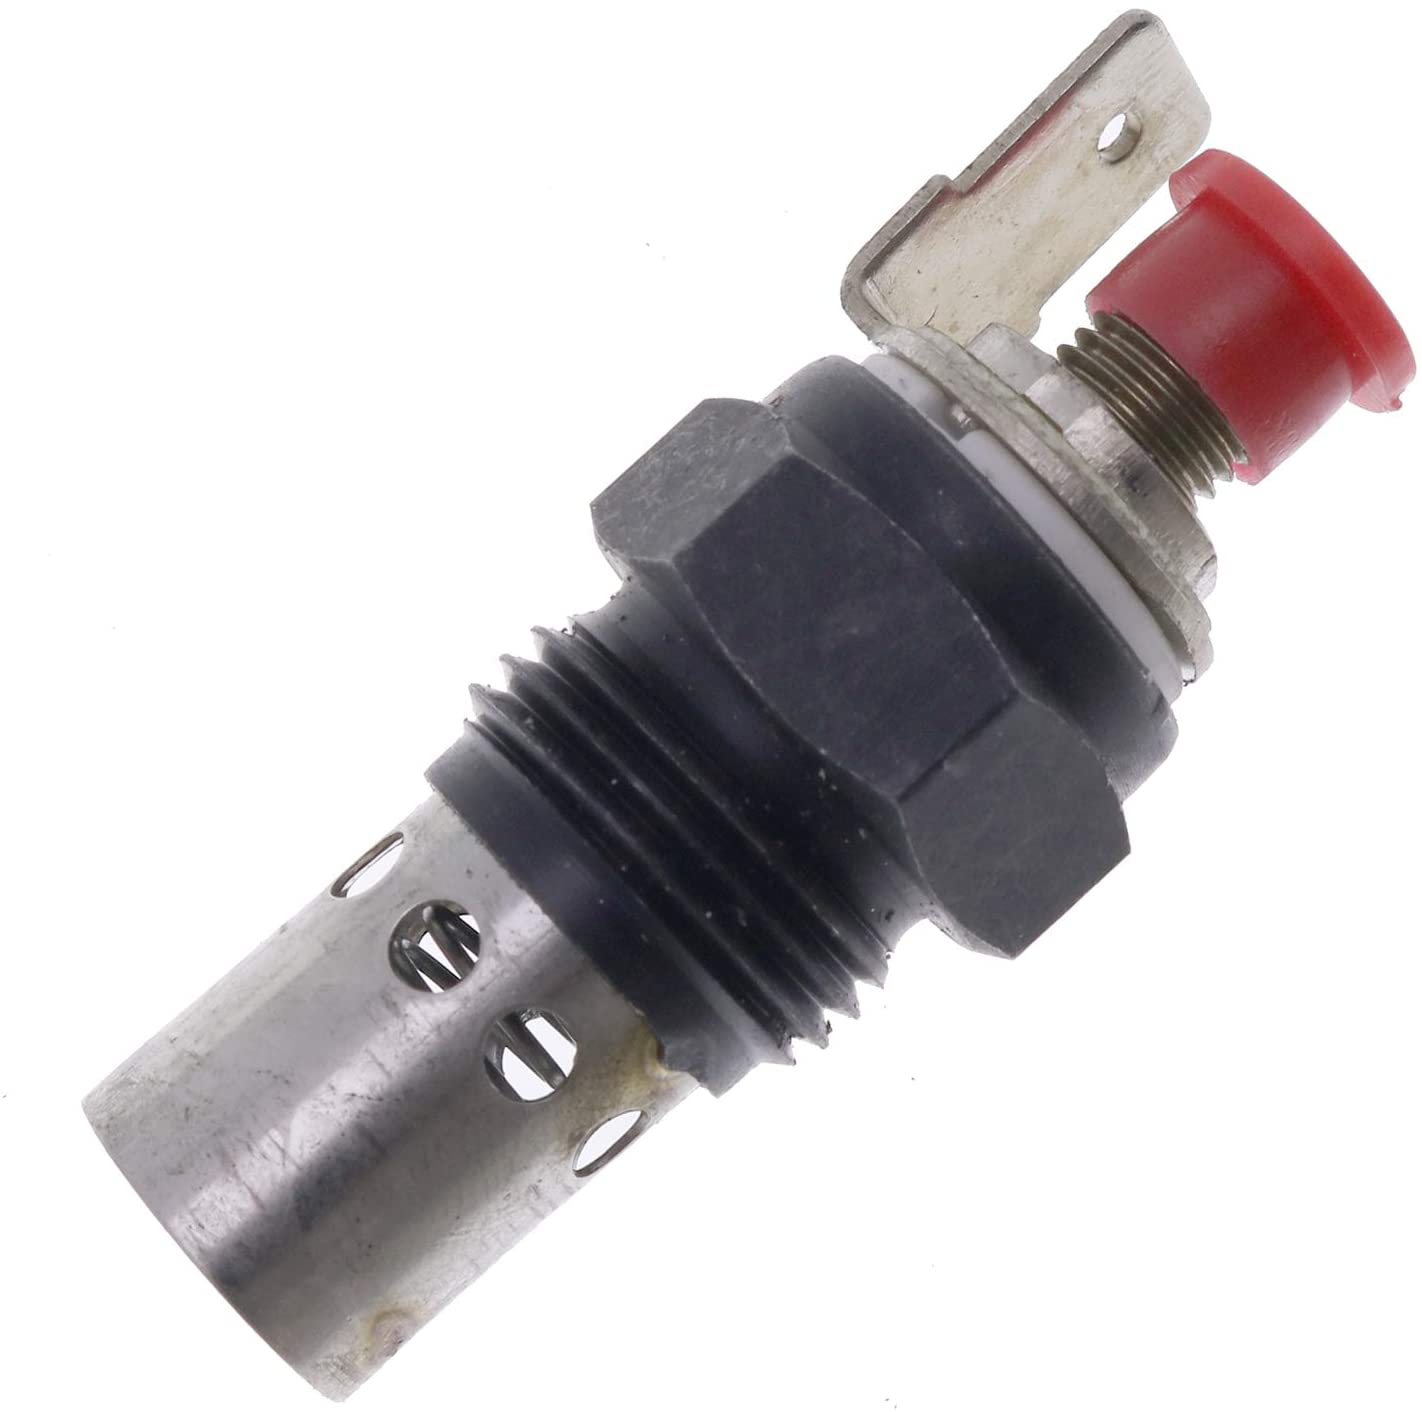 New 2666108 3583543M2 Pre-Heater Glow Plug for Perkins 3.152 4.203 4.236 4.248 6.354 1004.4 1006.6 Engines - KUDUPARTS